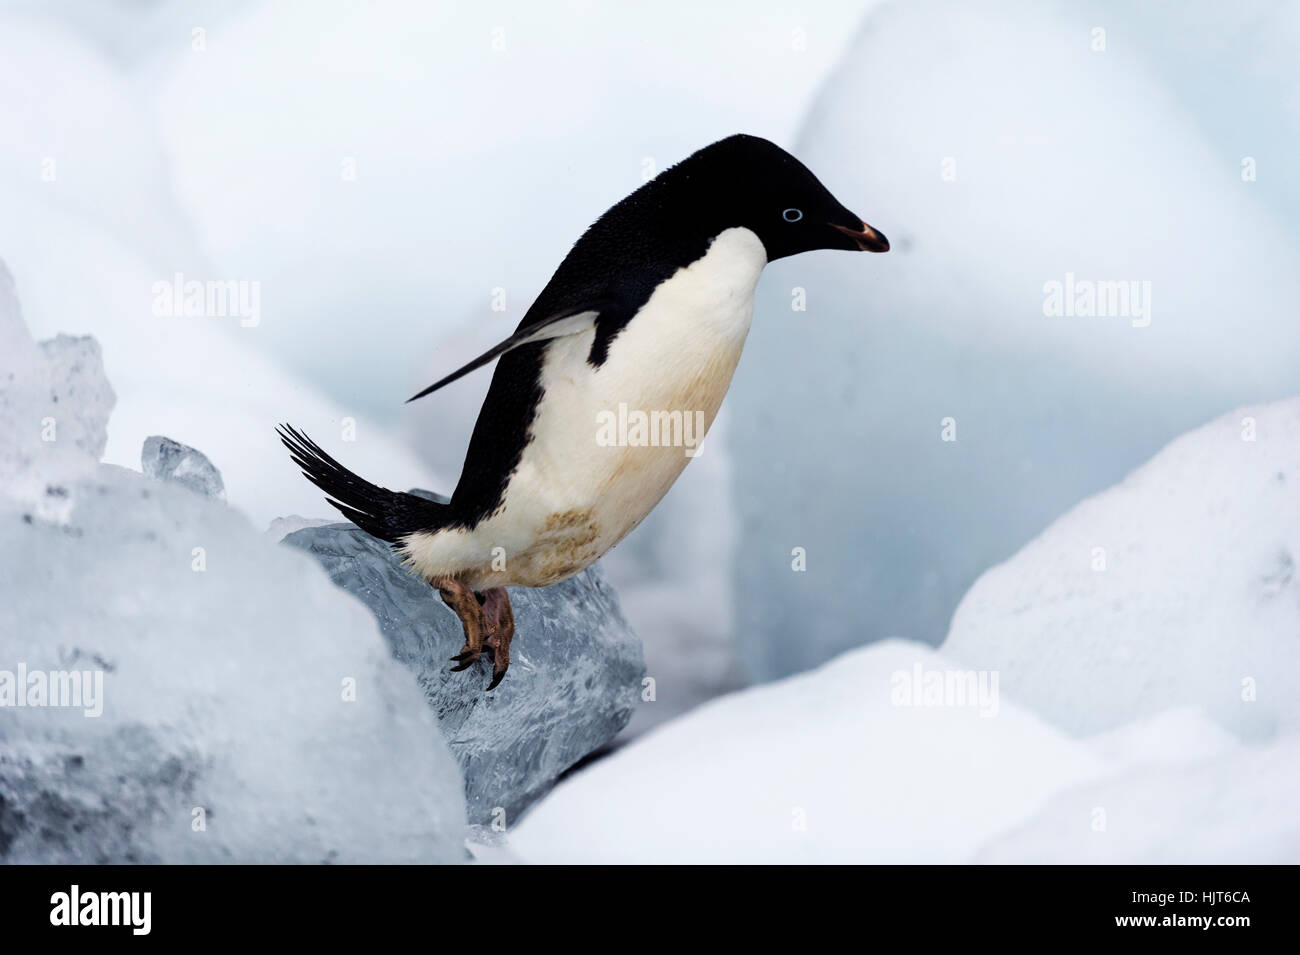 An Adelie Penguin trying to reach the shore though a field of ice boulders. Stock Photo